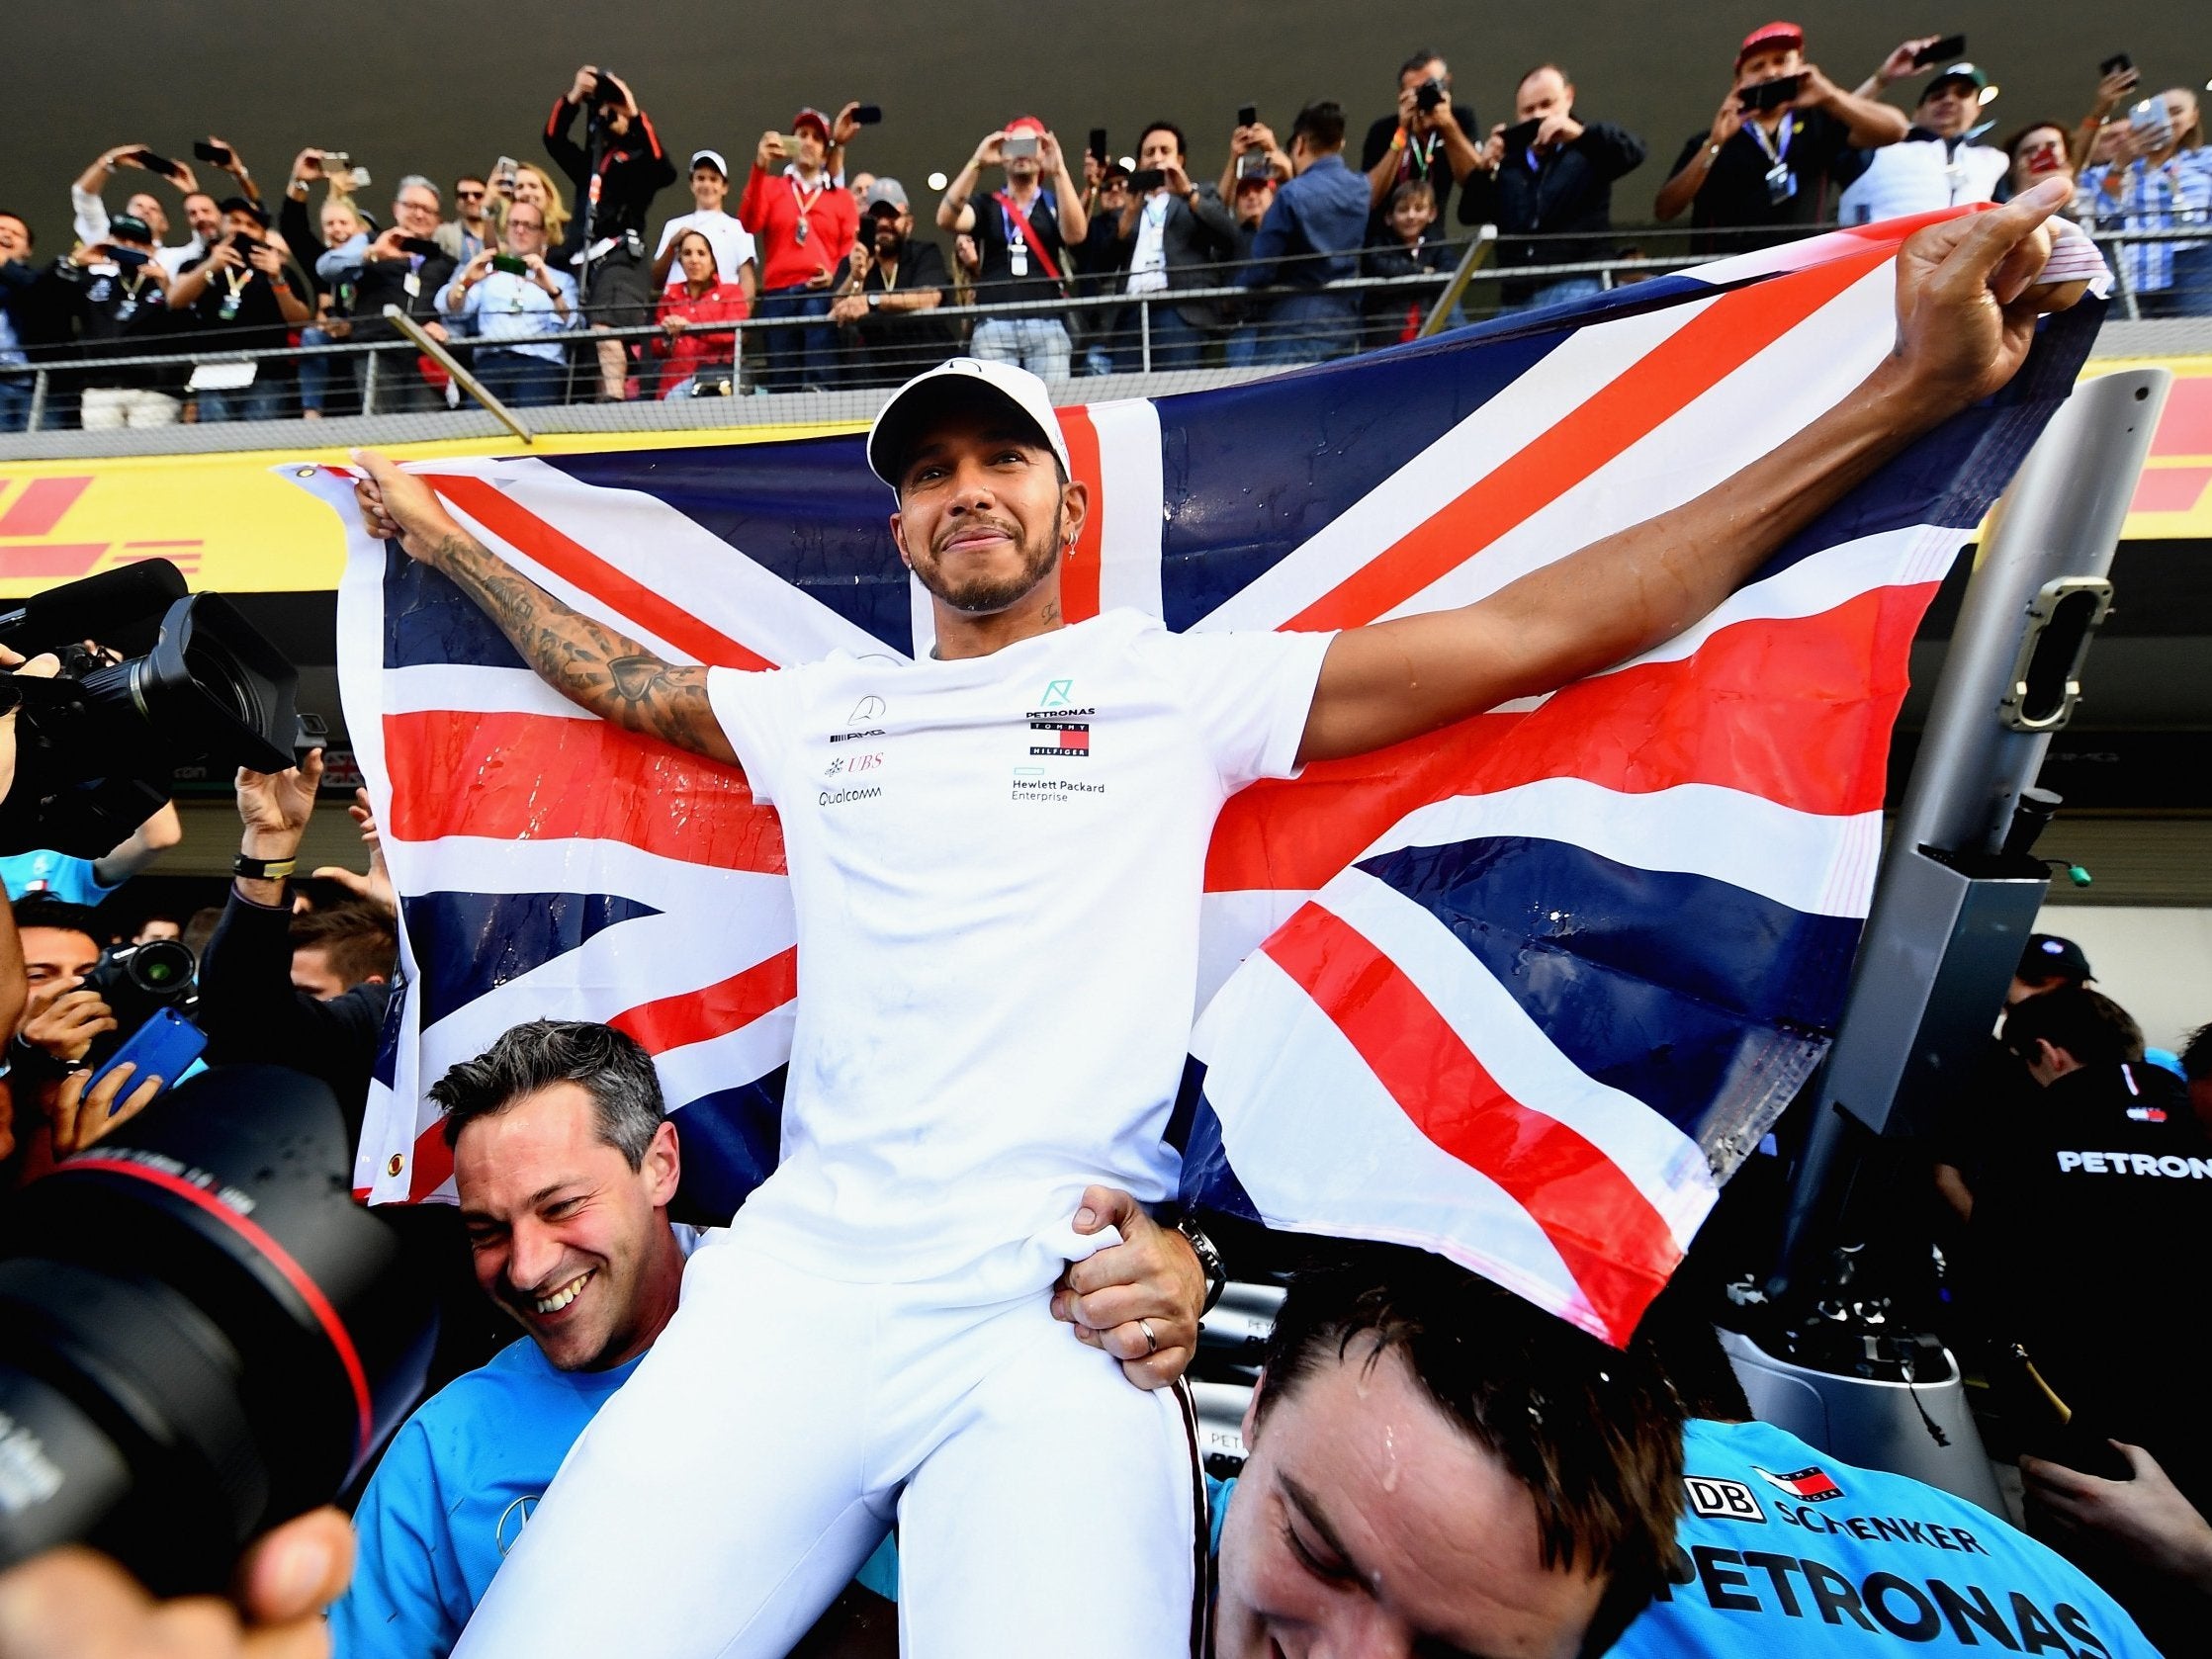 Lewis Hamilton recently won his fifth world title but could walk away from the sport